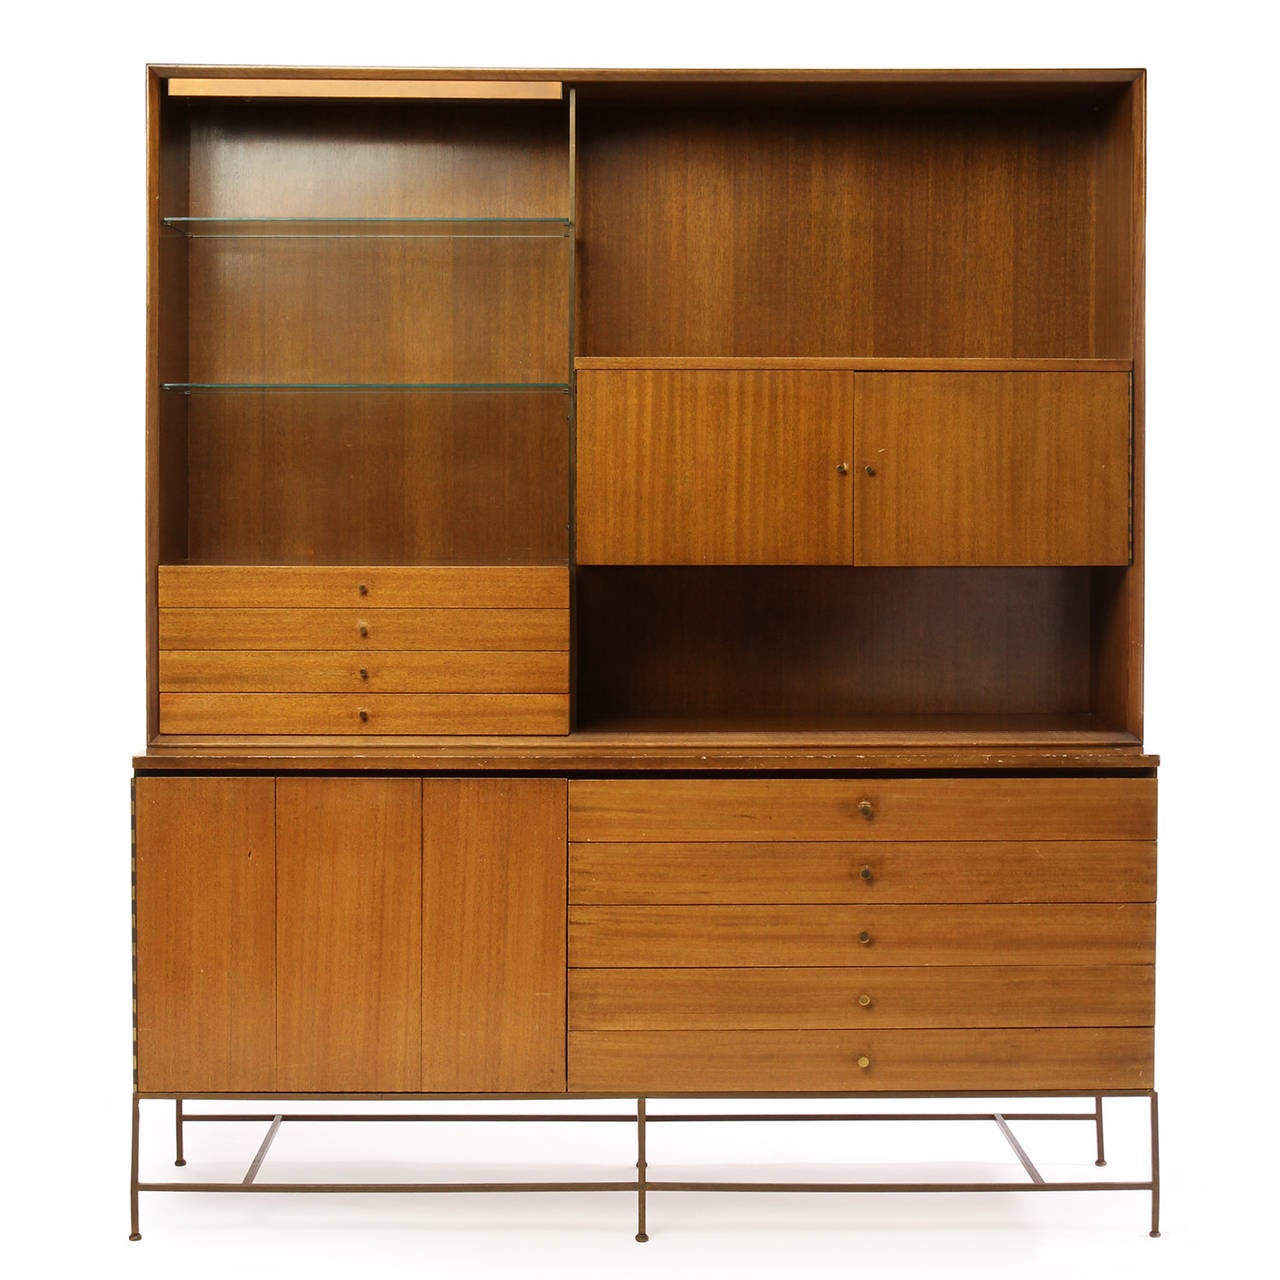 A well scaled Mid-Century Modern étagère in bleached walnut designed by Paul McCobb. The cabinet or shelf set is constructed in solid walnut wood and brass and features two separate lower or upper cabinet units. The lower cabinet with drawers and a